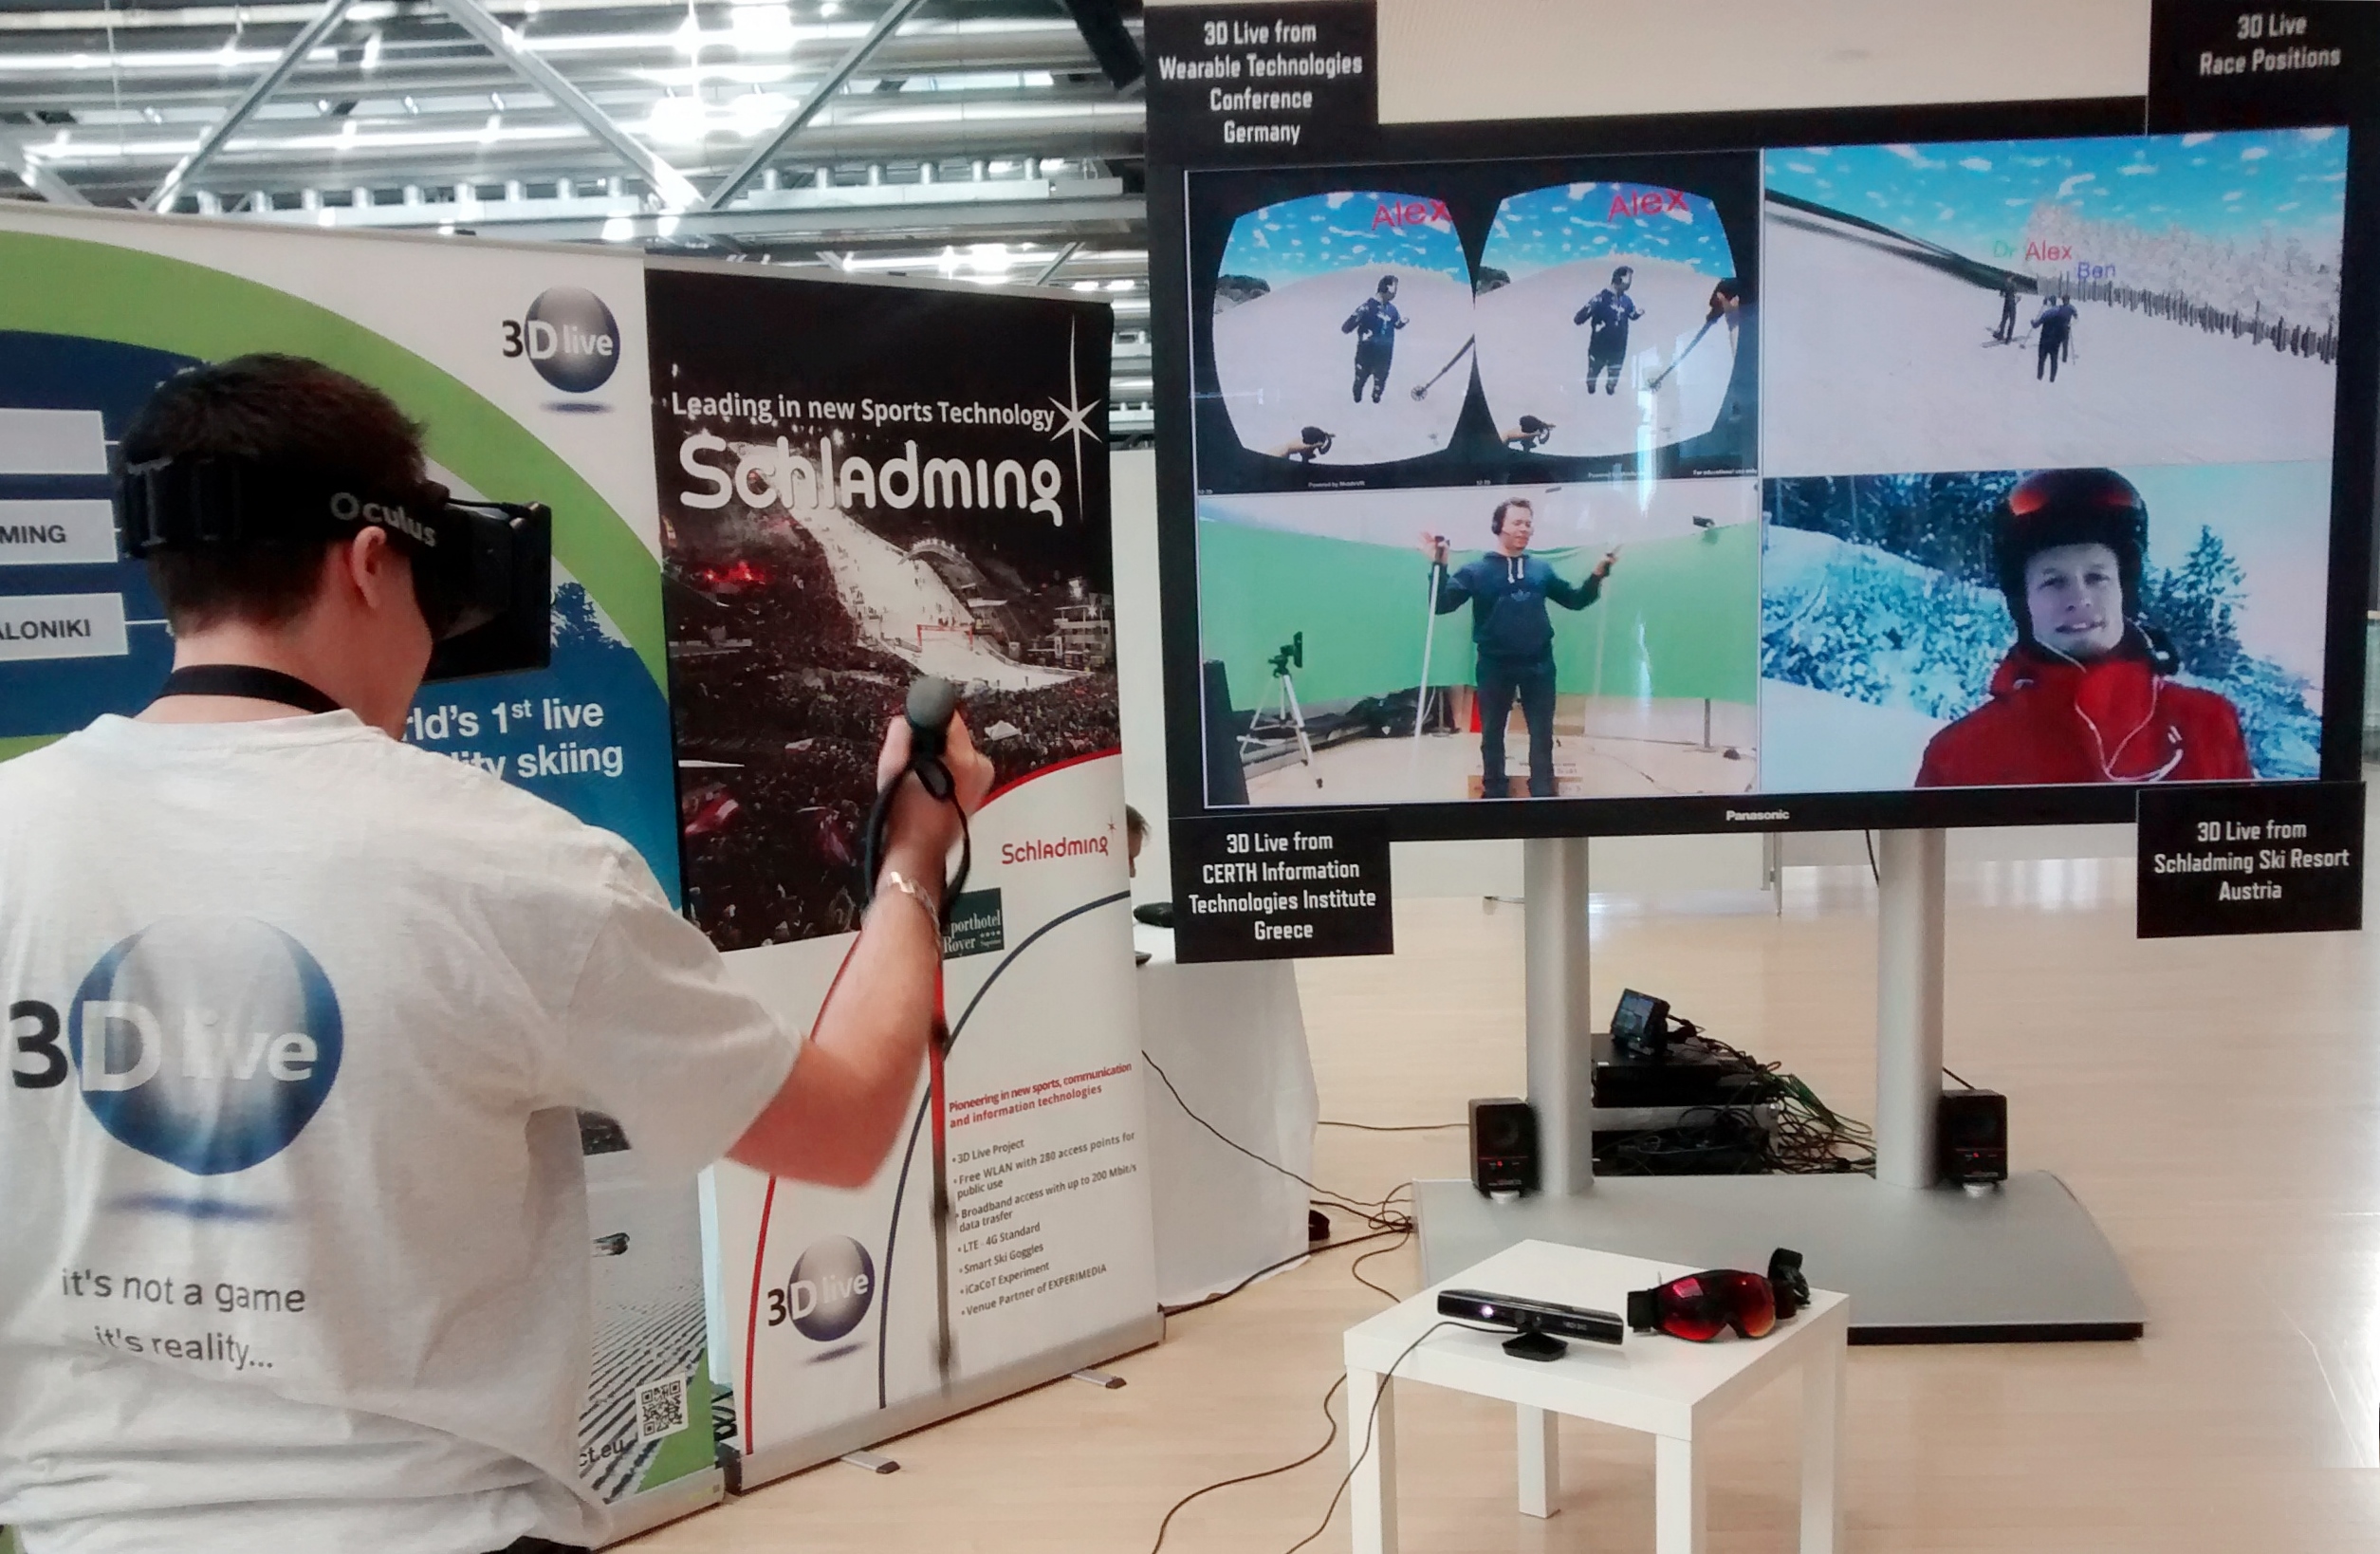 Spotlight: 3DLive and The World's First 'Mixed Reality' Ski Race